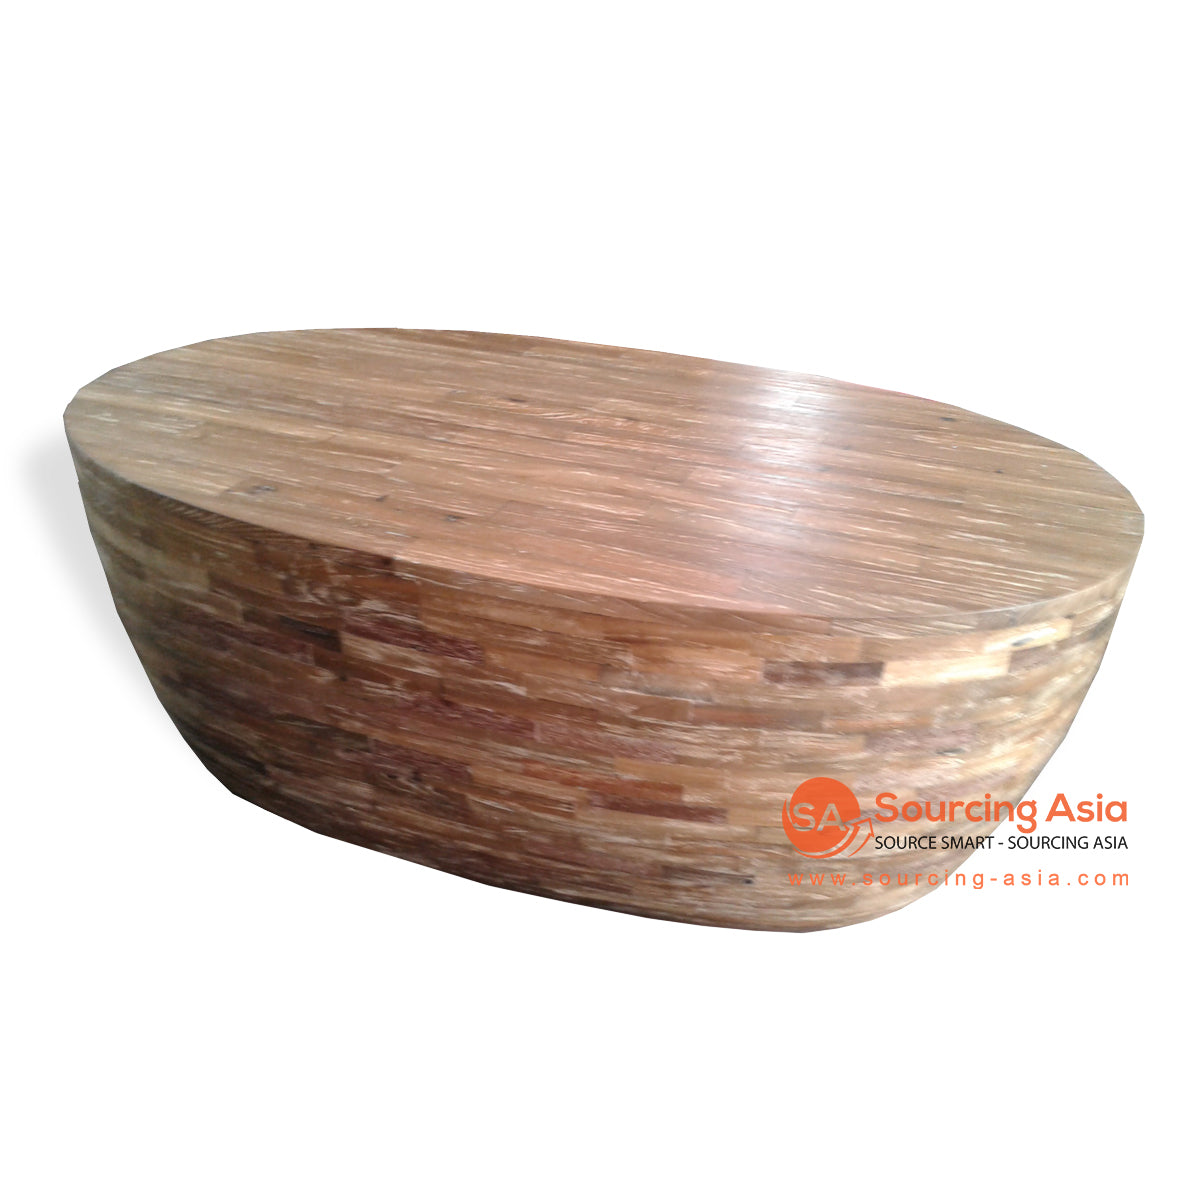 DLO006-1 NATURAL RECYCLED BOAT WOOD OVAL COFFEE TABLE